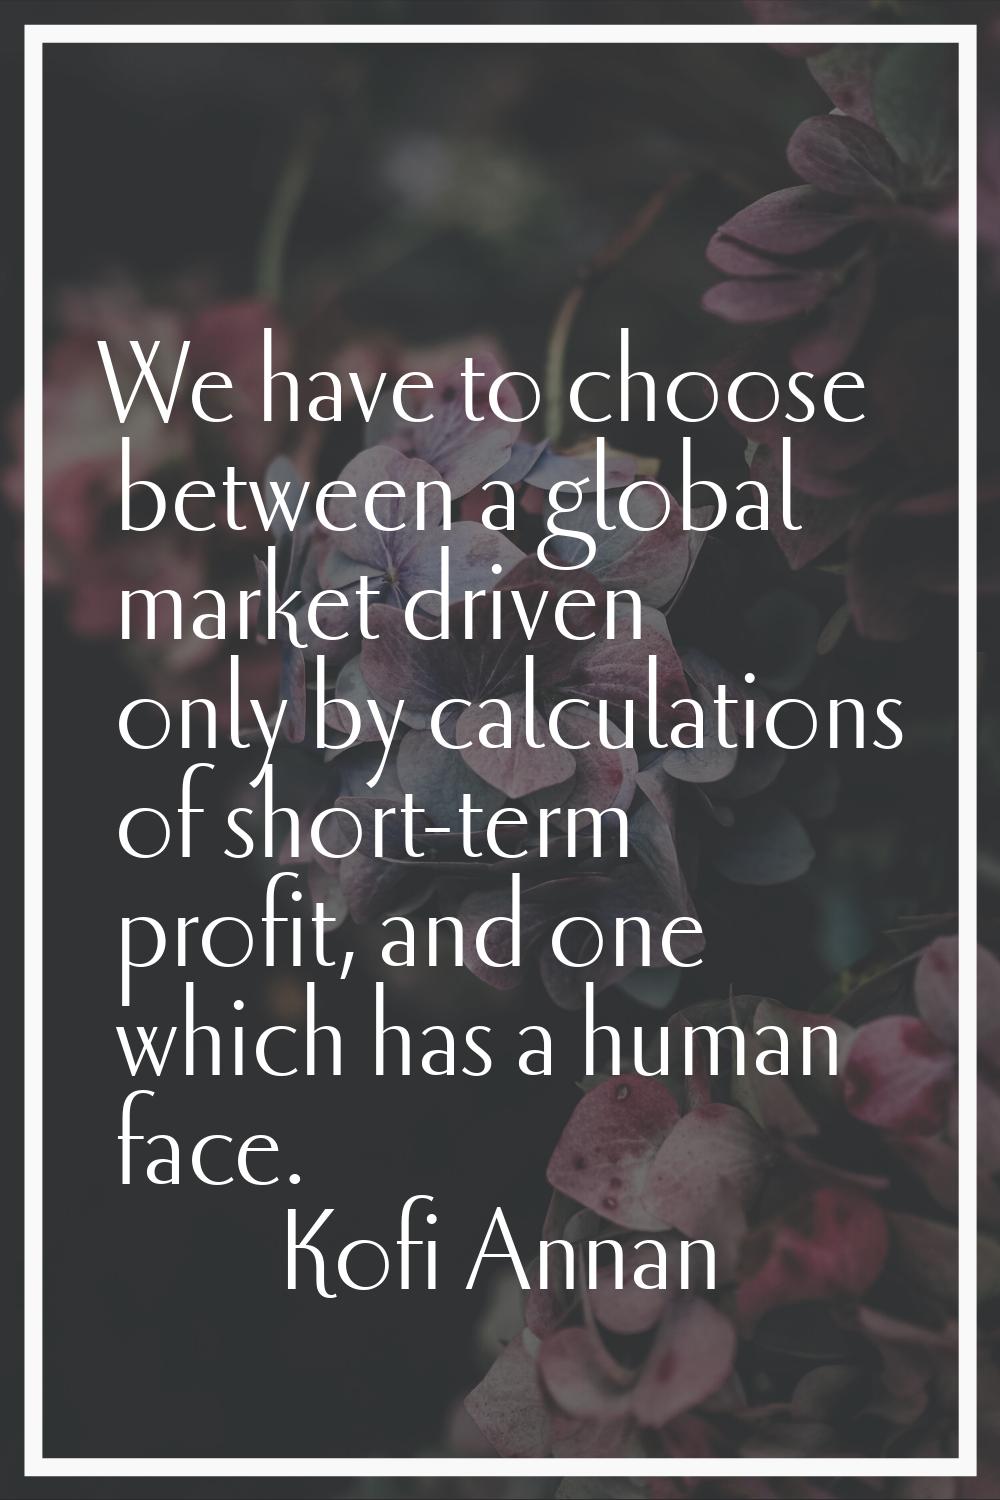 We have to choose between a global market driven only by calculations of short-term profit, and one